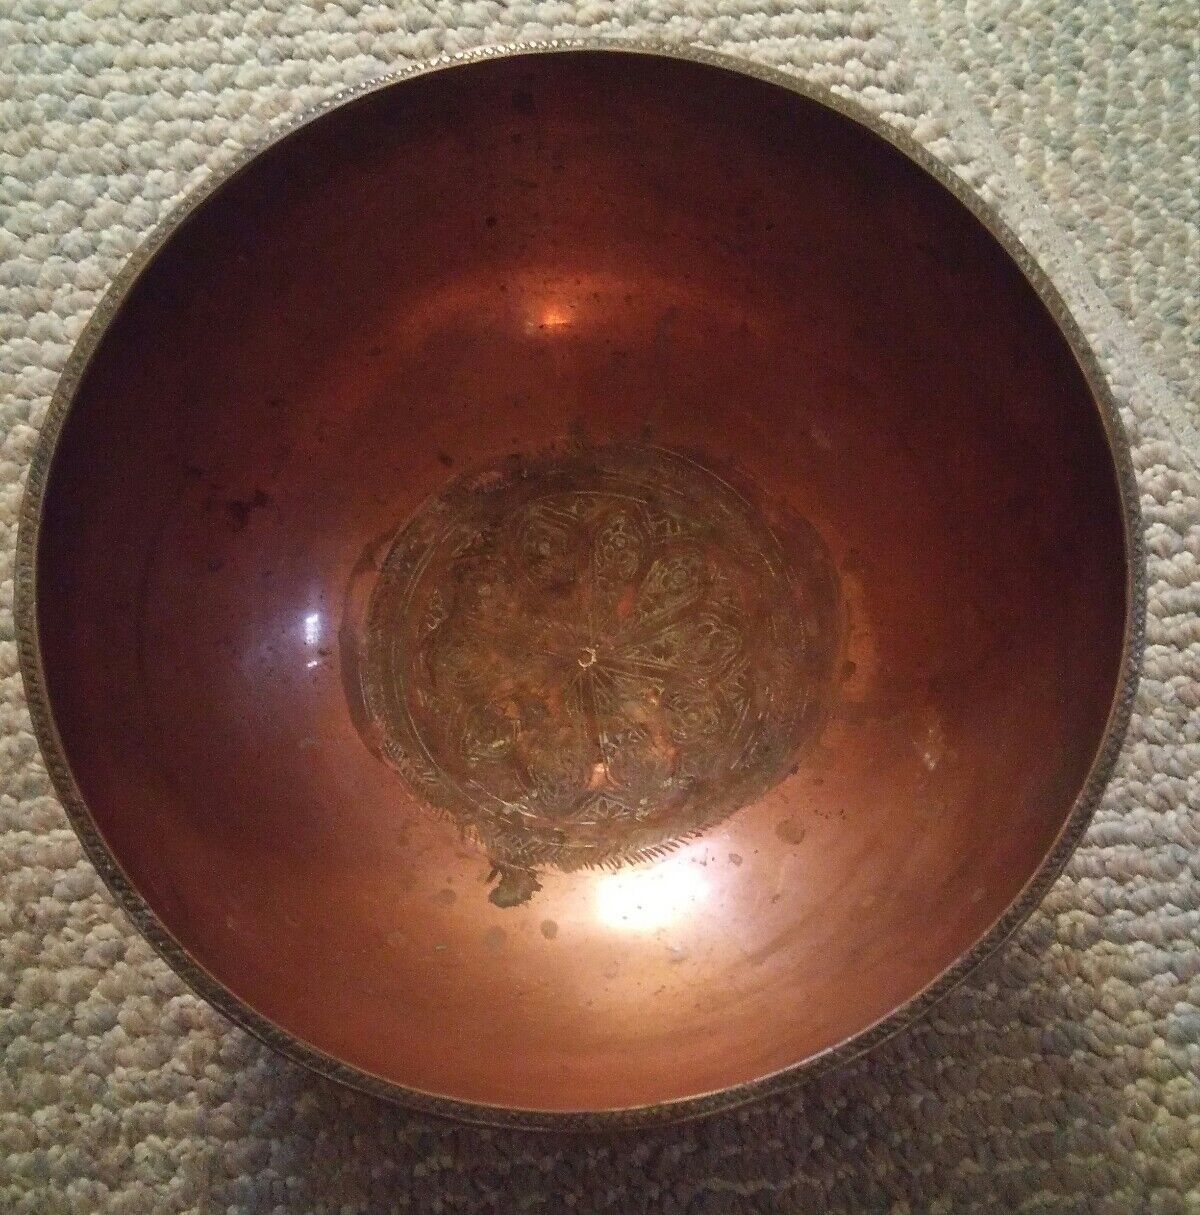 Primary image for 043 Antique Copper Bowl Etched? Stamped? Middle Eastern Persian Pakistan?